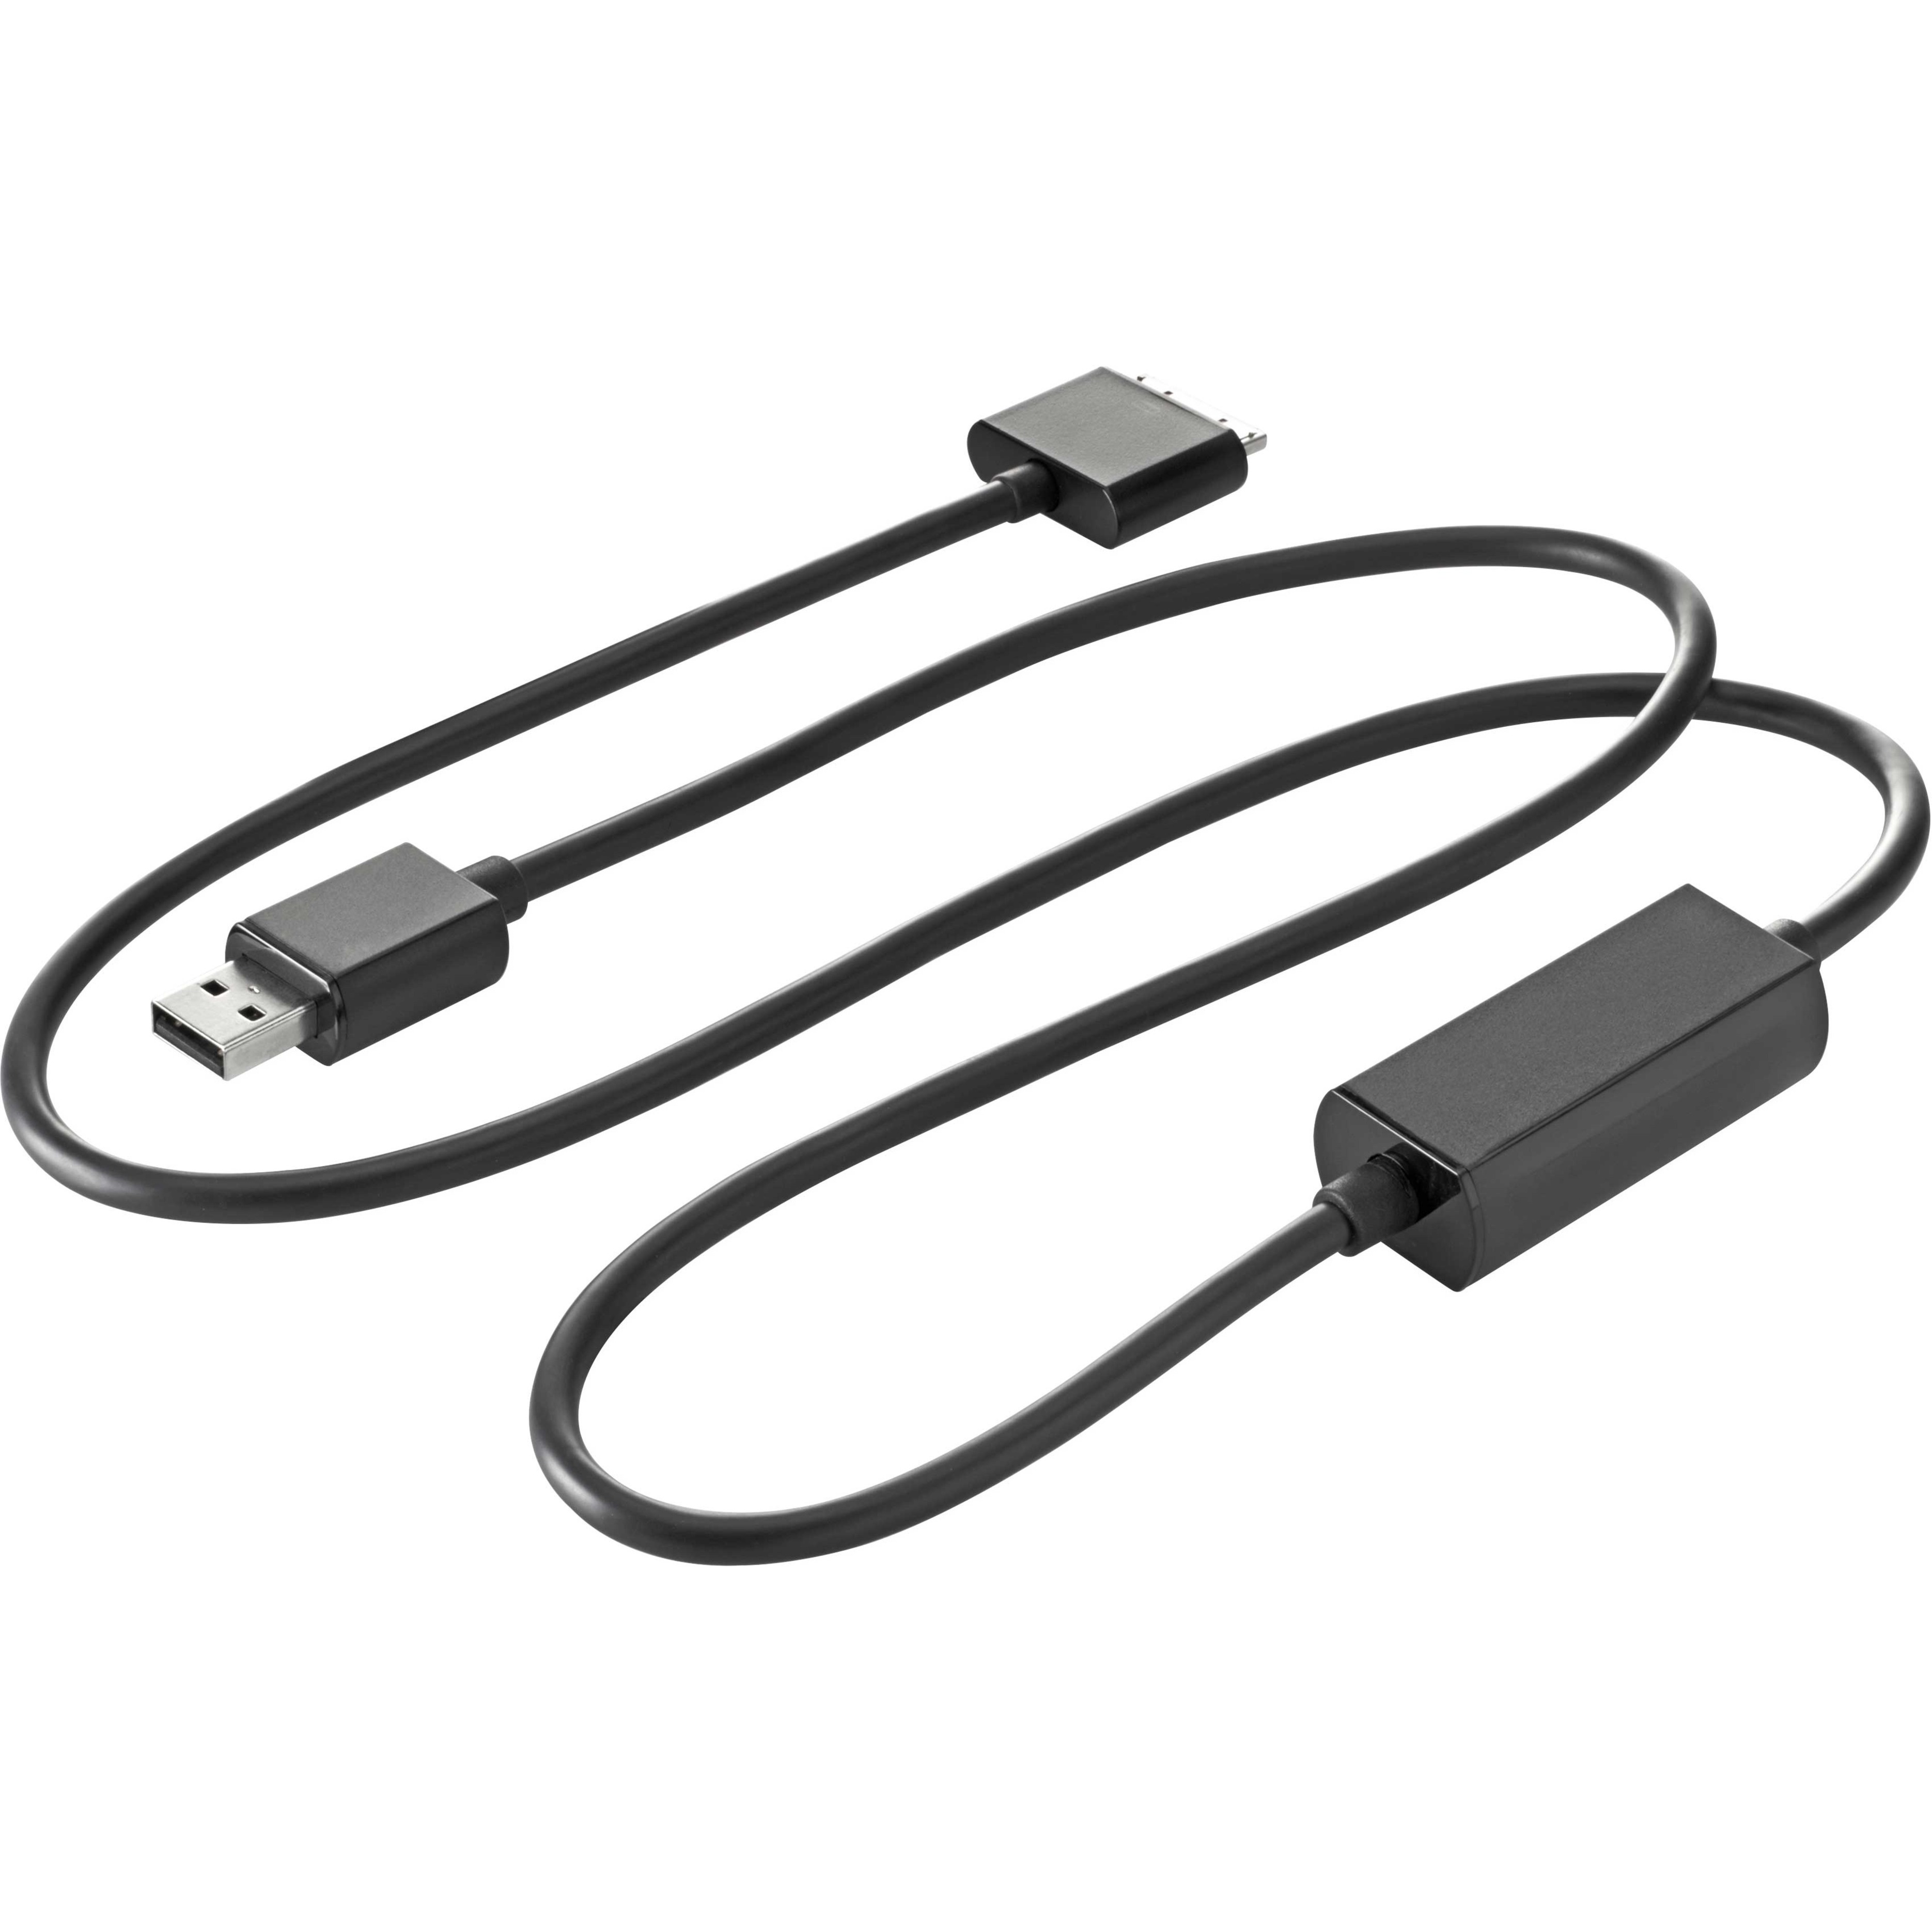 HP ElitePad USB (24 pack) Charging Cable - image 1 of 3